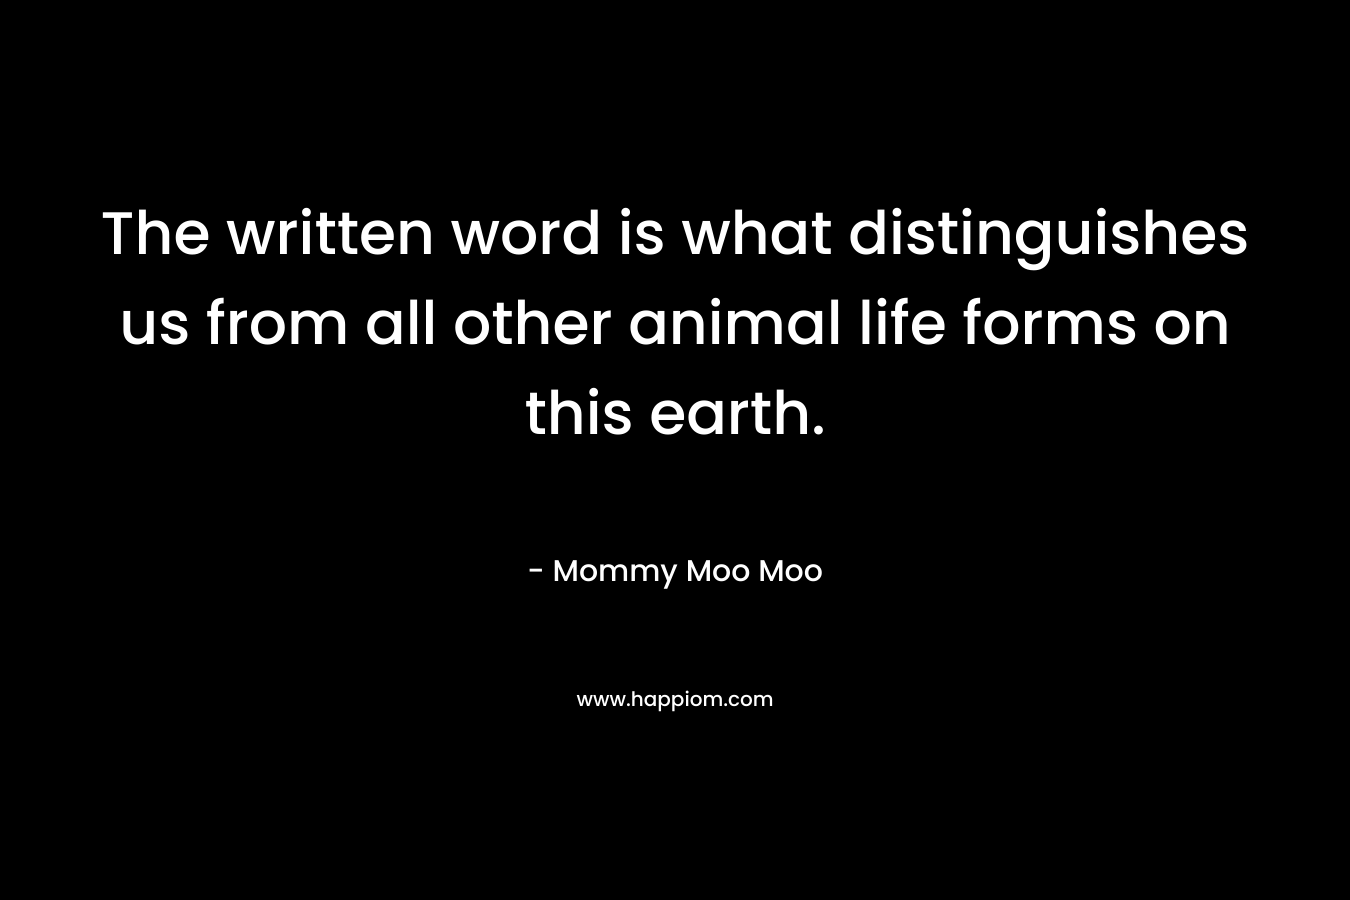 The written word is what distinguishes us from all other animal life forms on this earth.